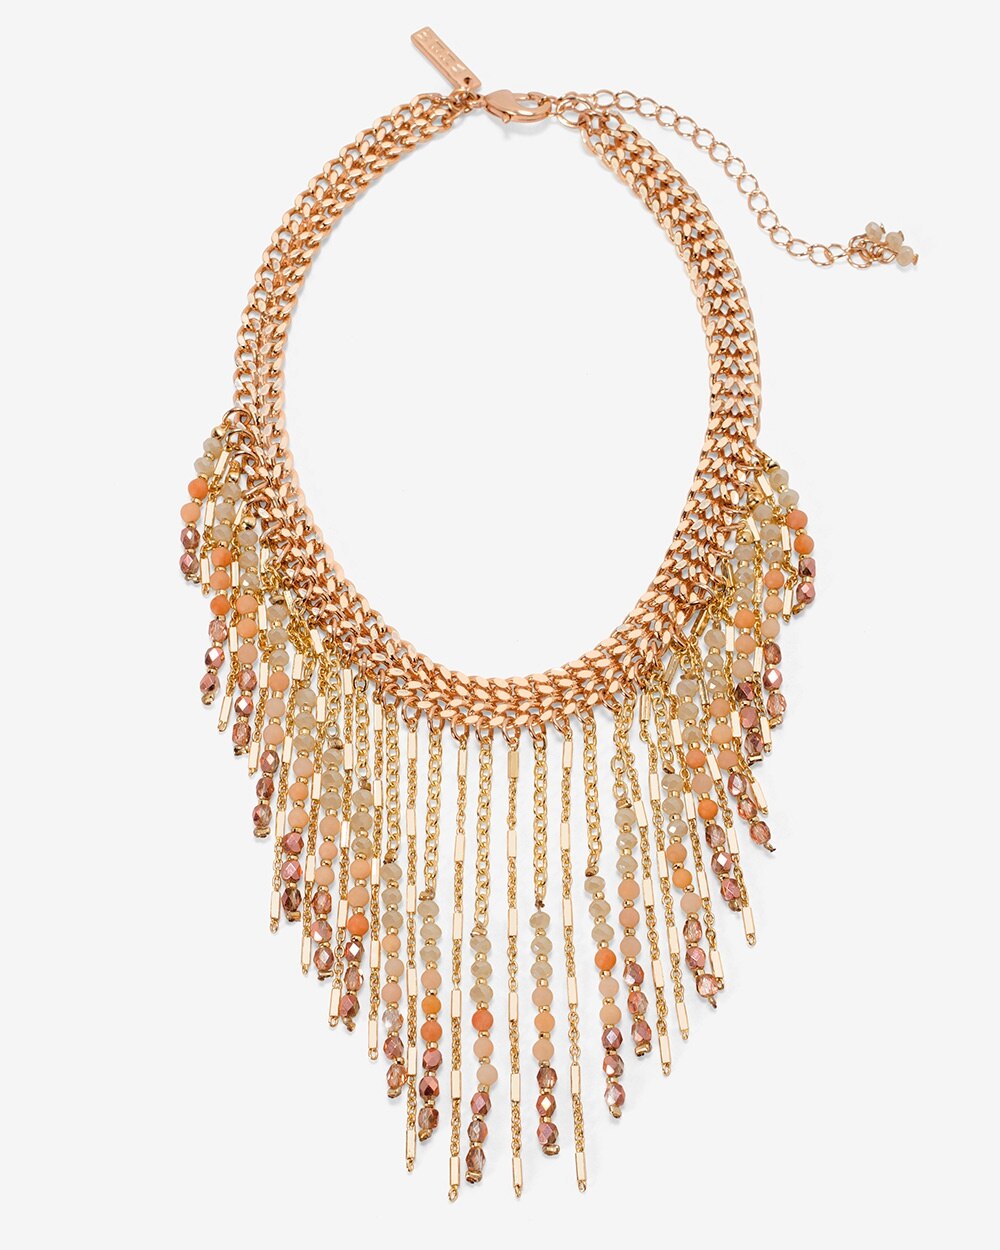 Rose Gold Beaded Choker Necklace - WHBM